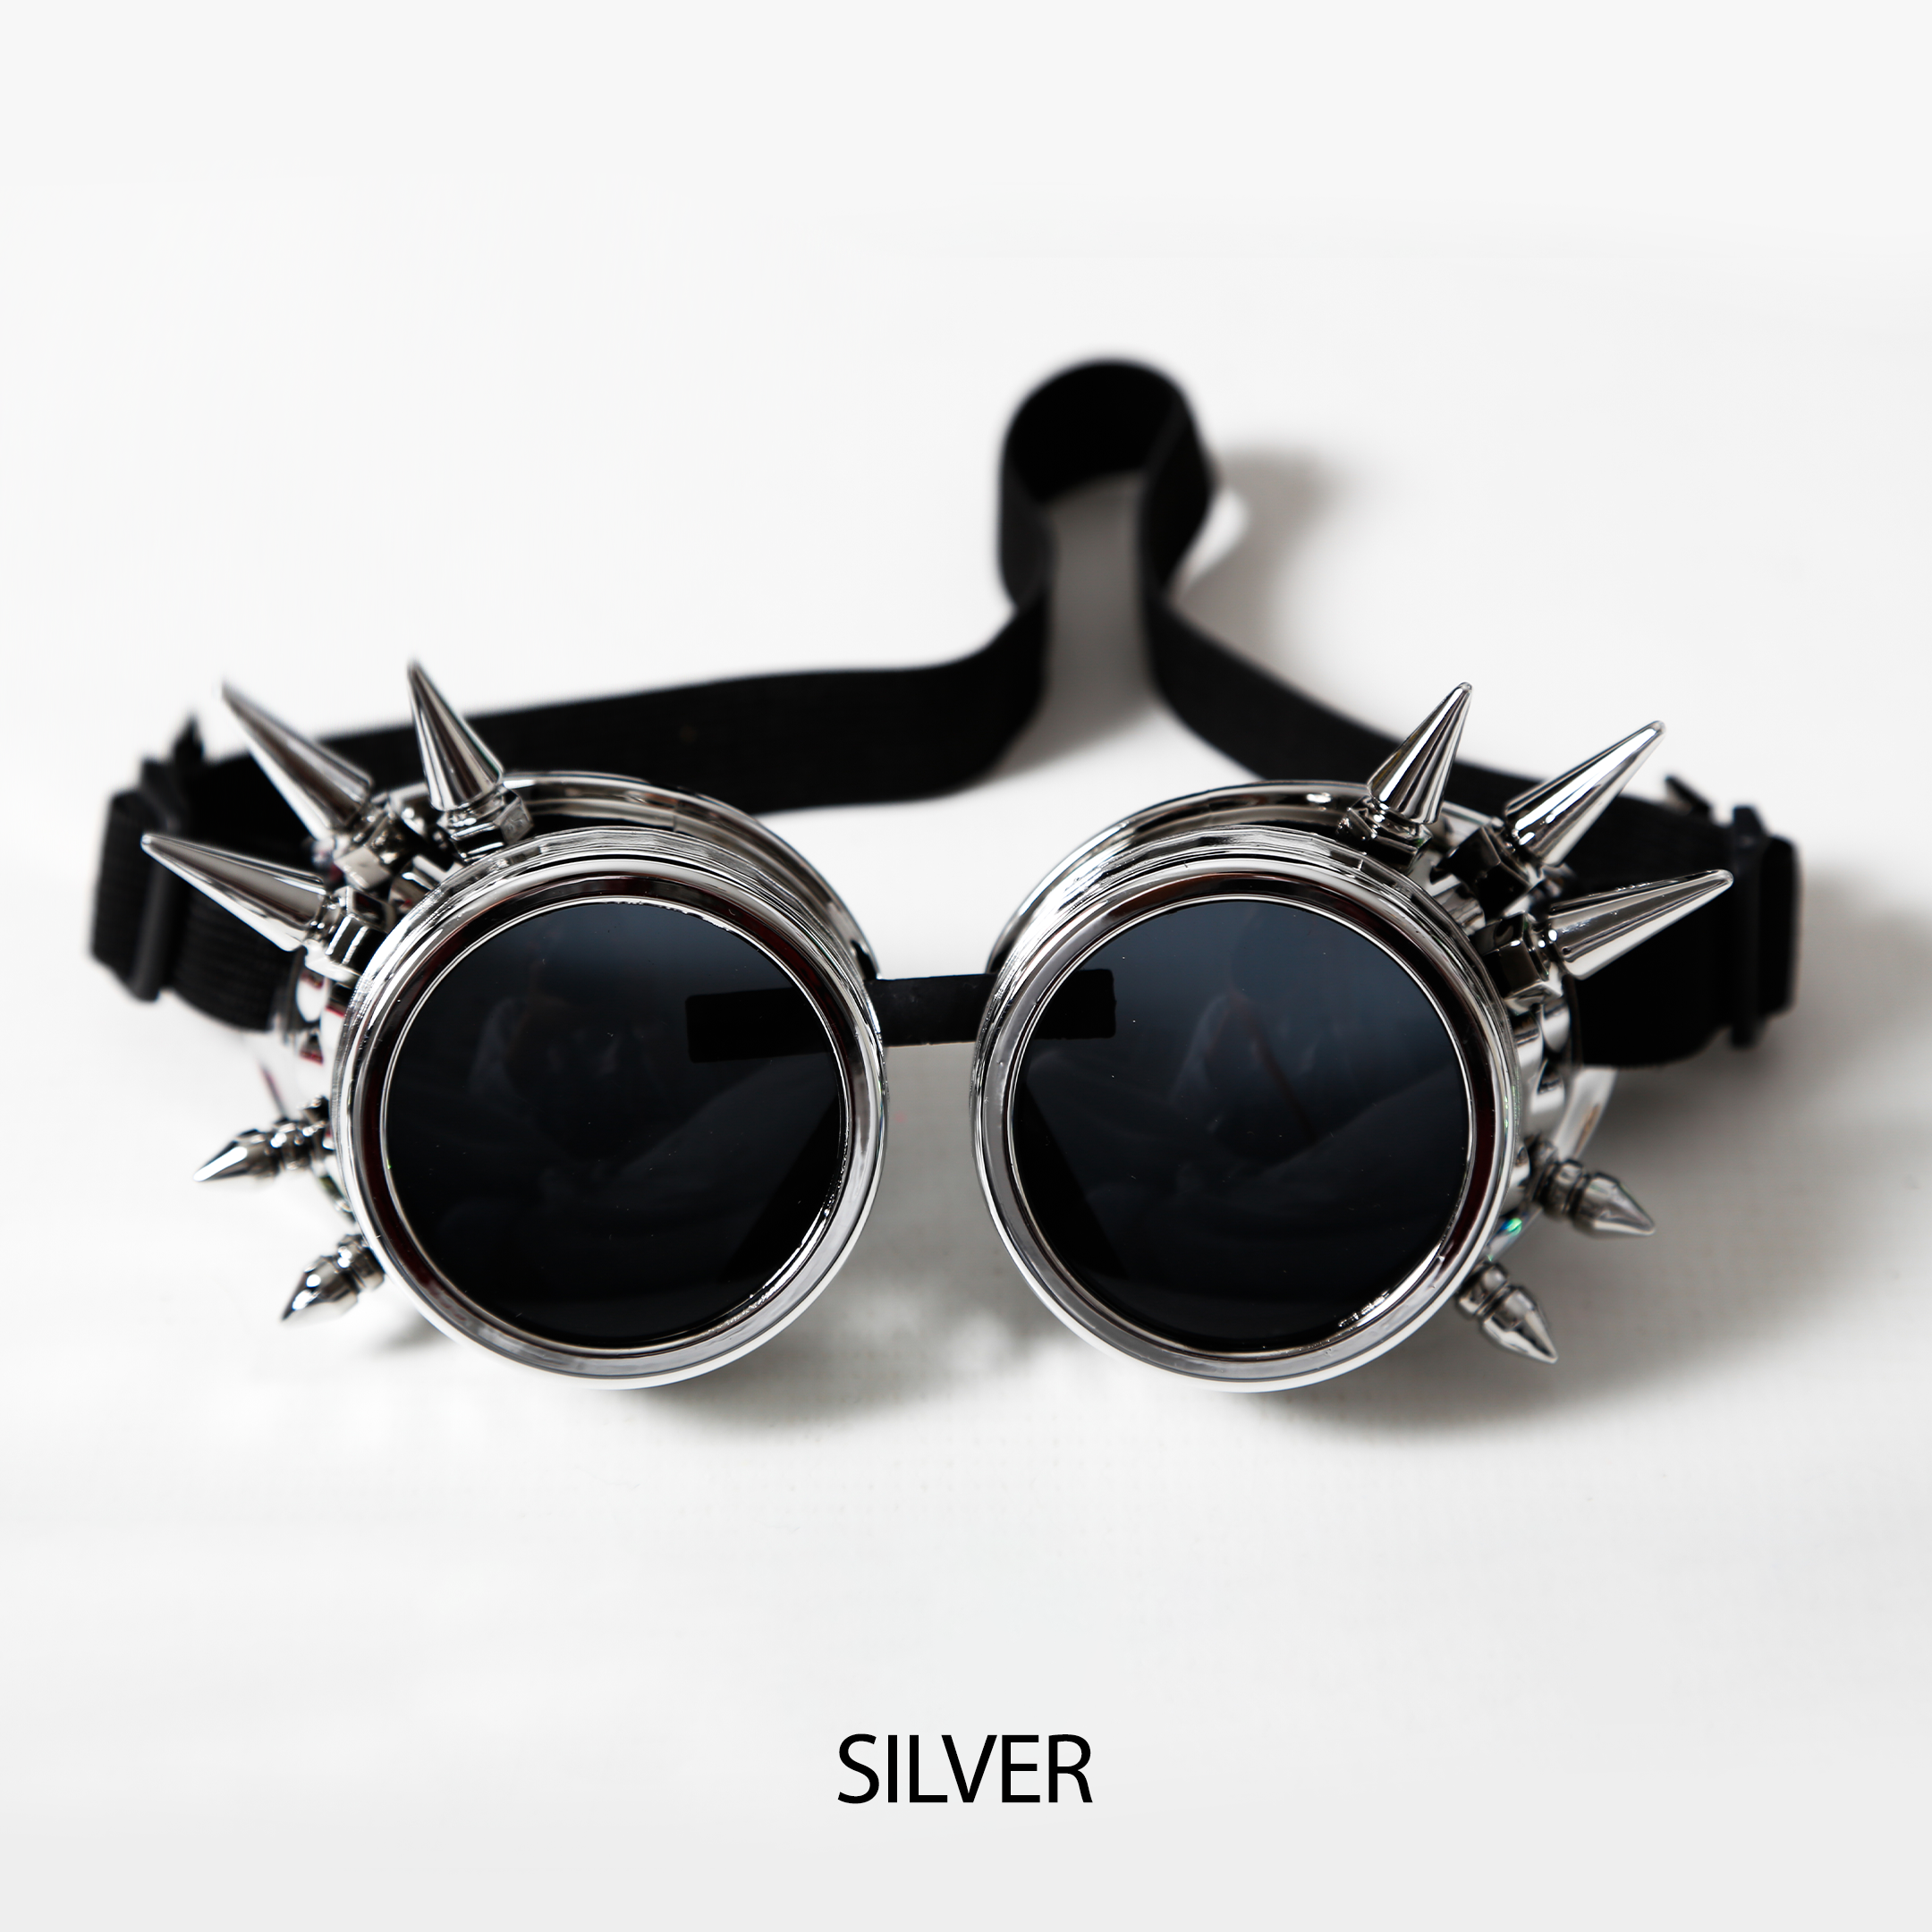 silver steampunk black lens glasses Electro Glow | South Africa's Best LED Festival Gear & Rave Clothes - festivals outfits, clothes festival, festival clothing south africa, festival ideas outfits, festival outfits rave, festival wear, steam punk goggle, rave glasses, outfit for a rave, kaleidoscope glasses, diffraction glasses, clothes for a rave, rave sunglasses, spectral glasses, rave goggles, clothes for a rave, rave clothing south africa, festival wear south africa, accessories festival